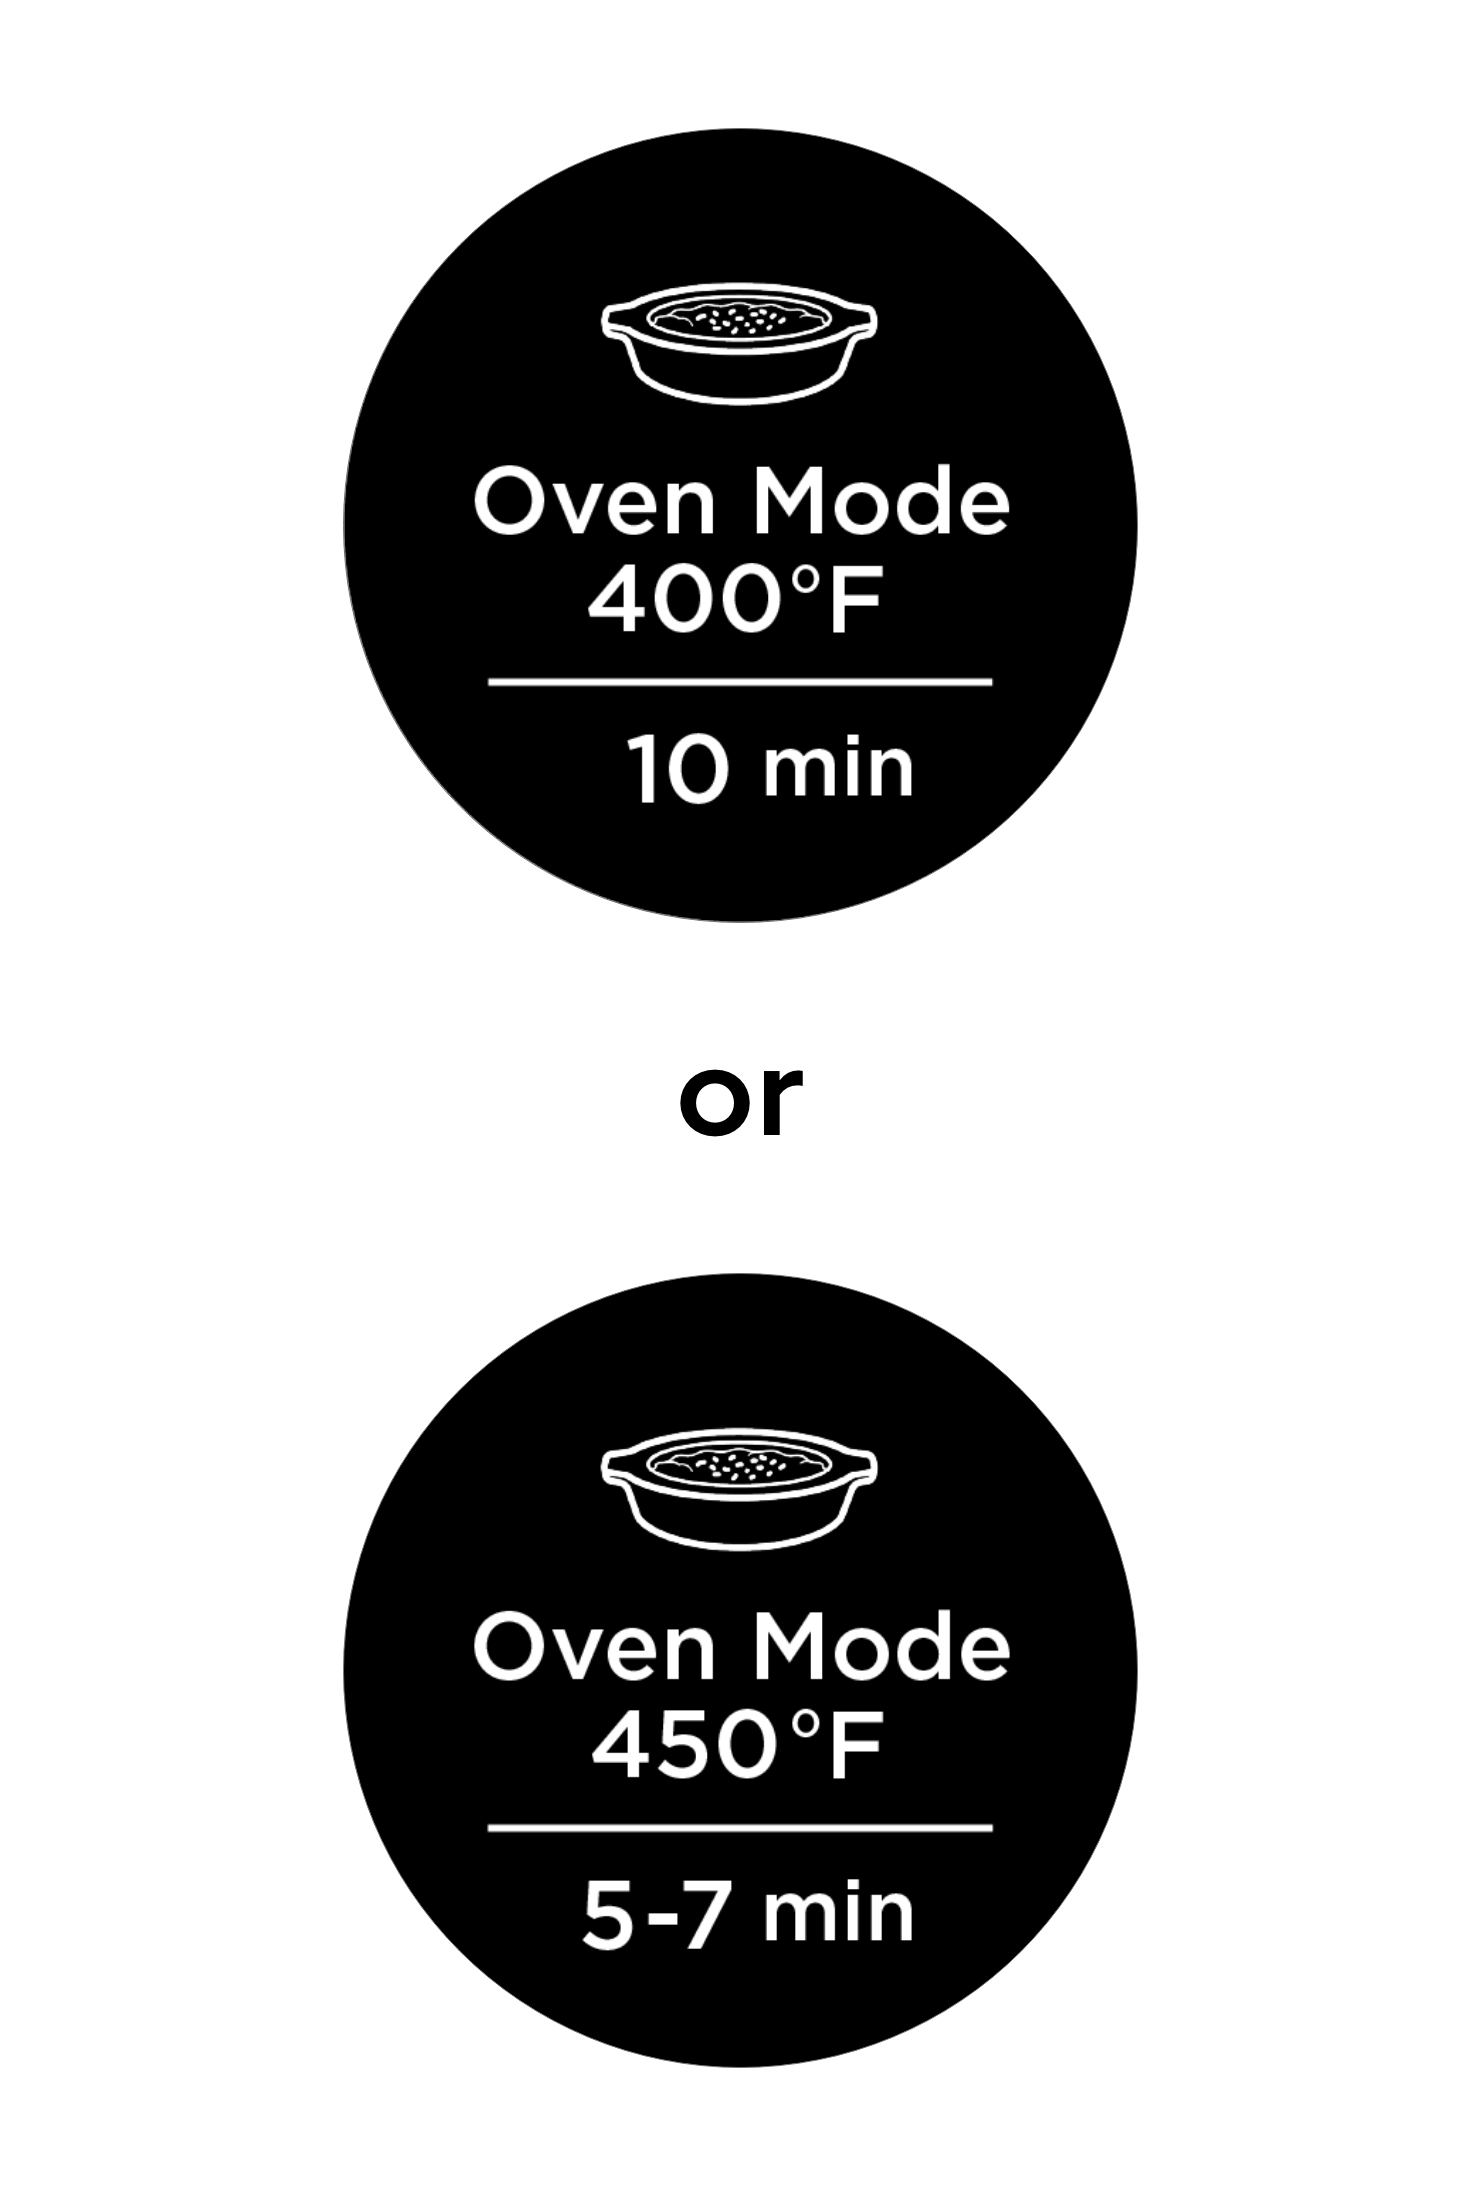 Oven Mode at 400°F for 10 minutes